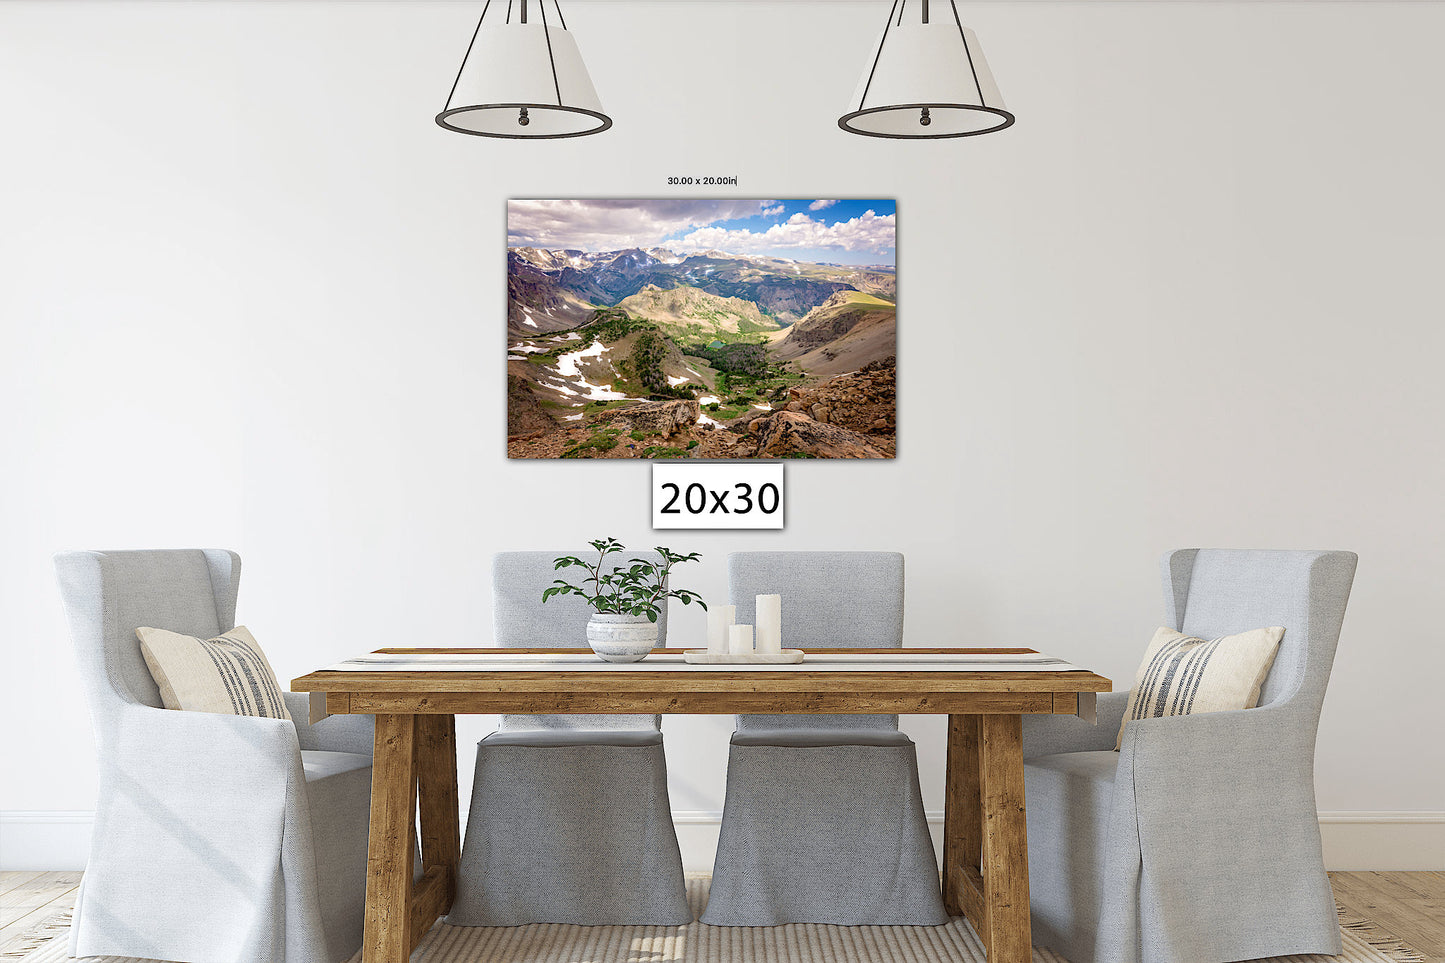 Beartooth Highway Photo, Montana Mountain Landscape, Yellowstone National Park, Large Canvas Wall Art Prints, Decor for Home and Office